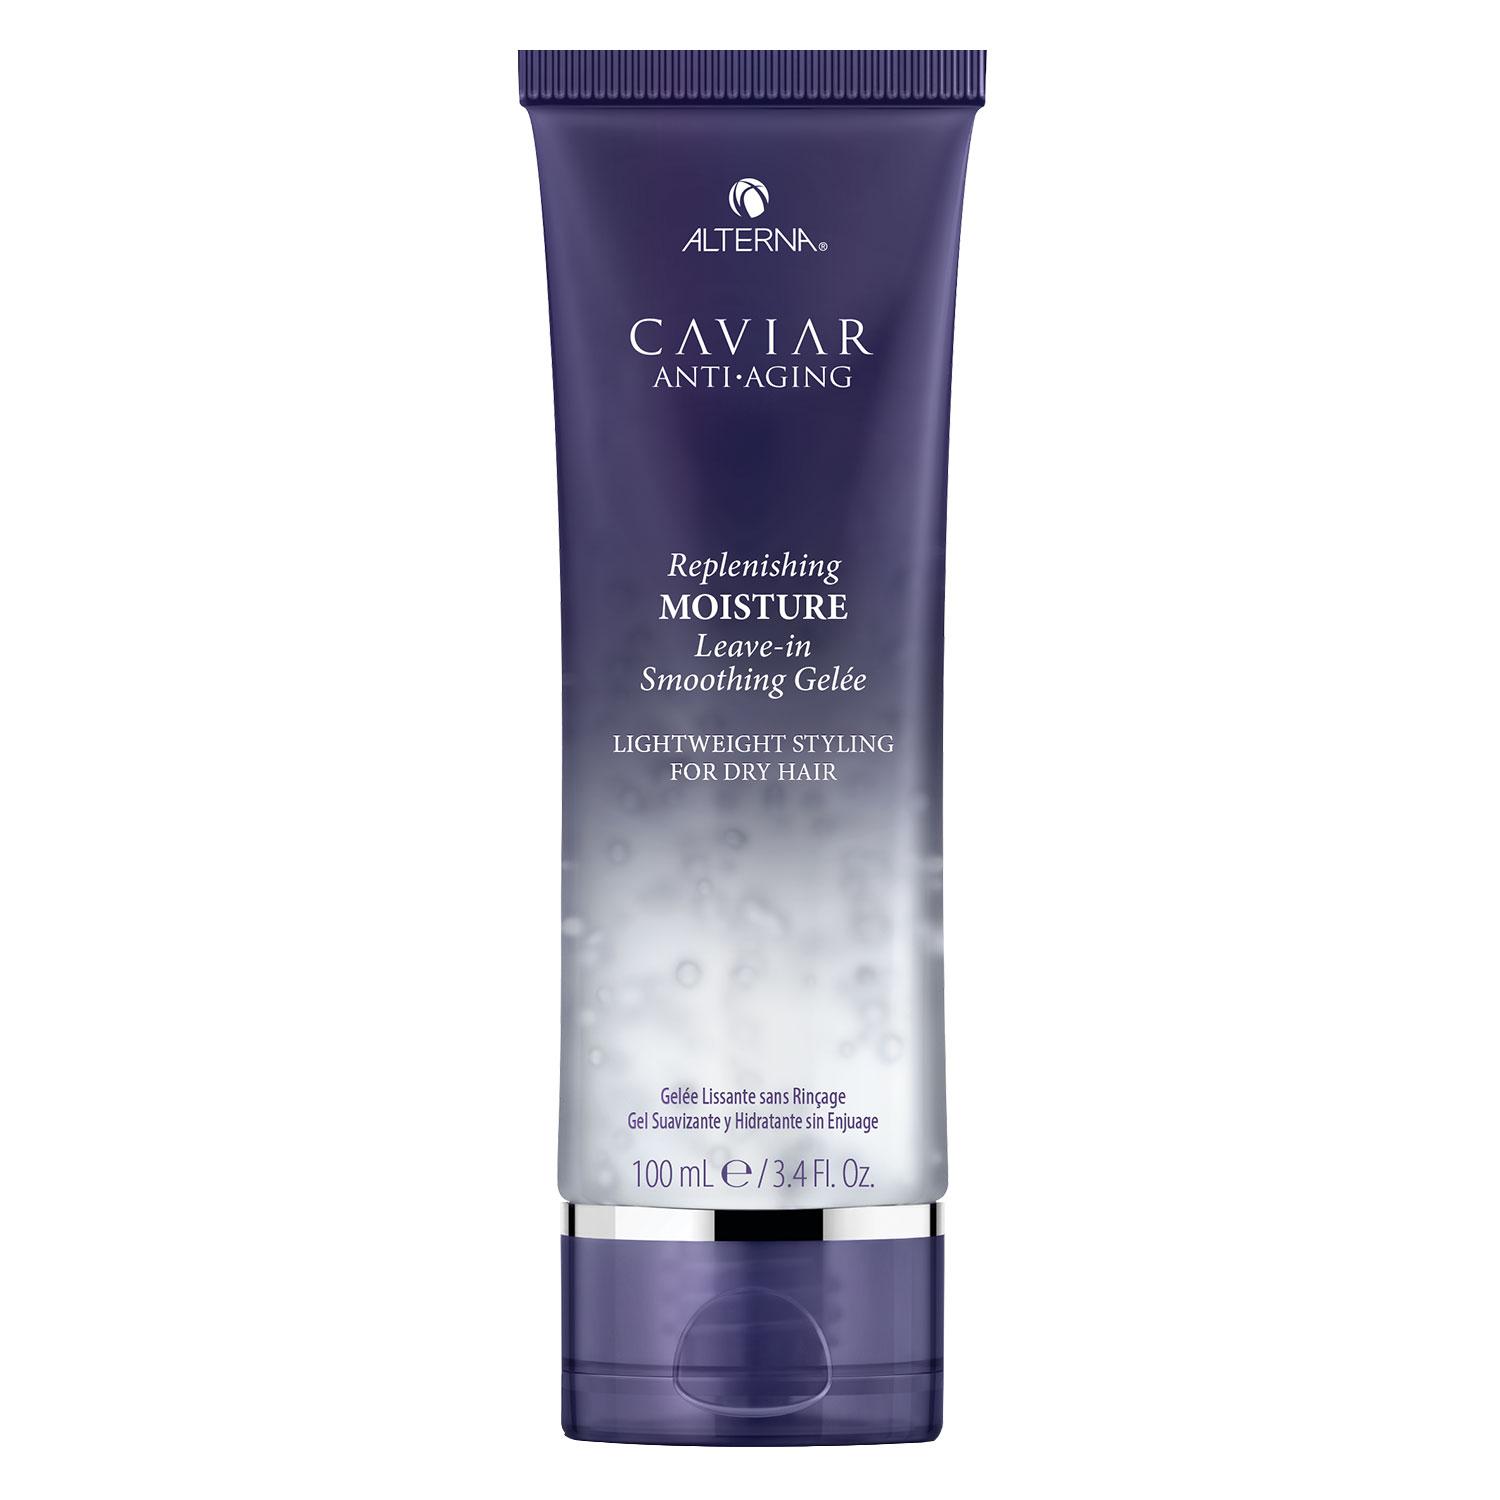 Caviar Replenishing Moisture - Leave-in Smoothing Gelee